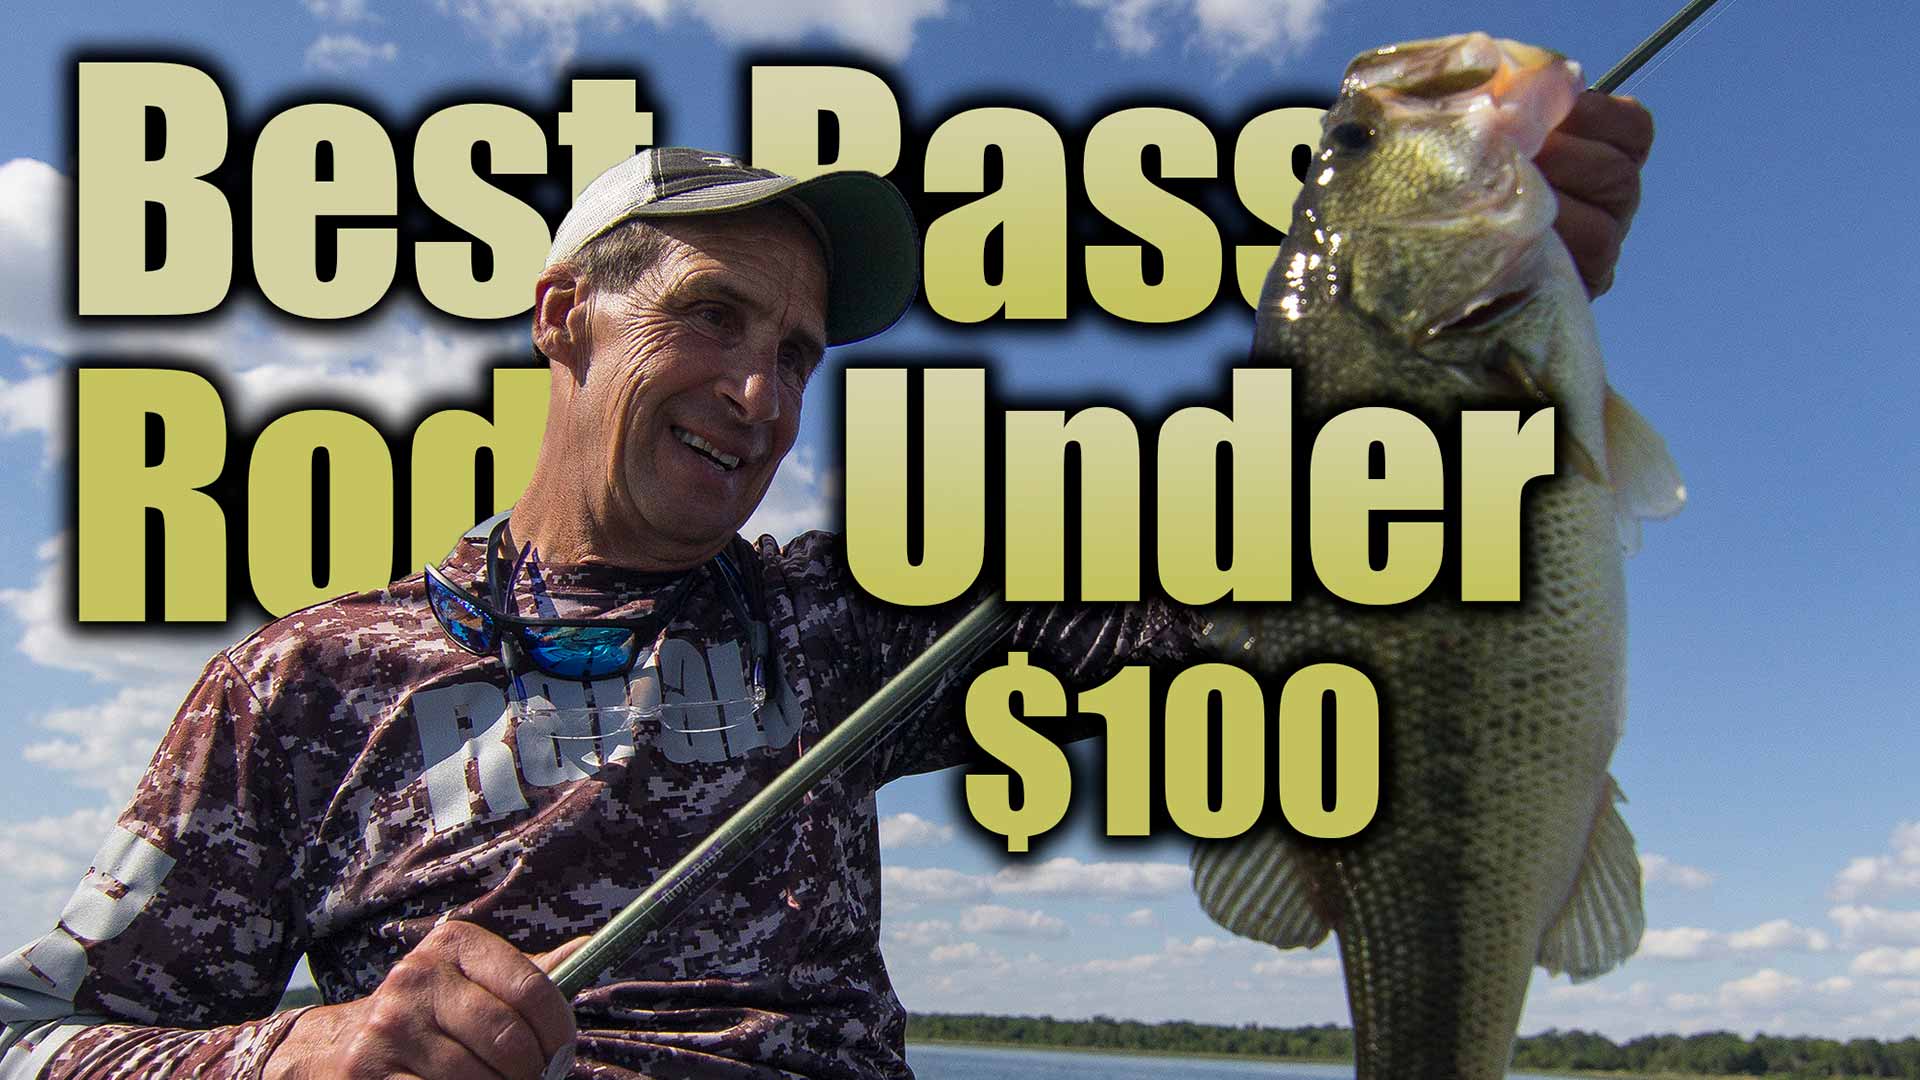 Bass fishing equipment 3 x rods 2 x reals plus much more